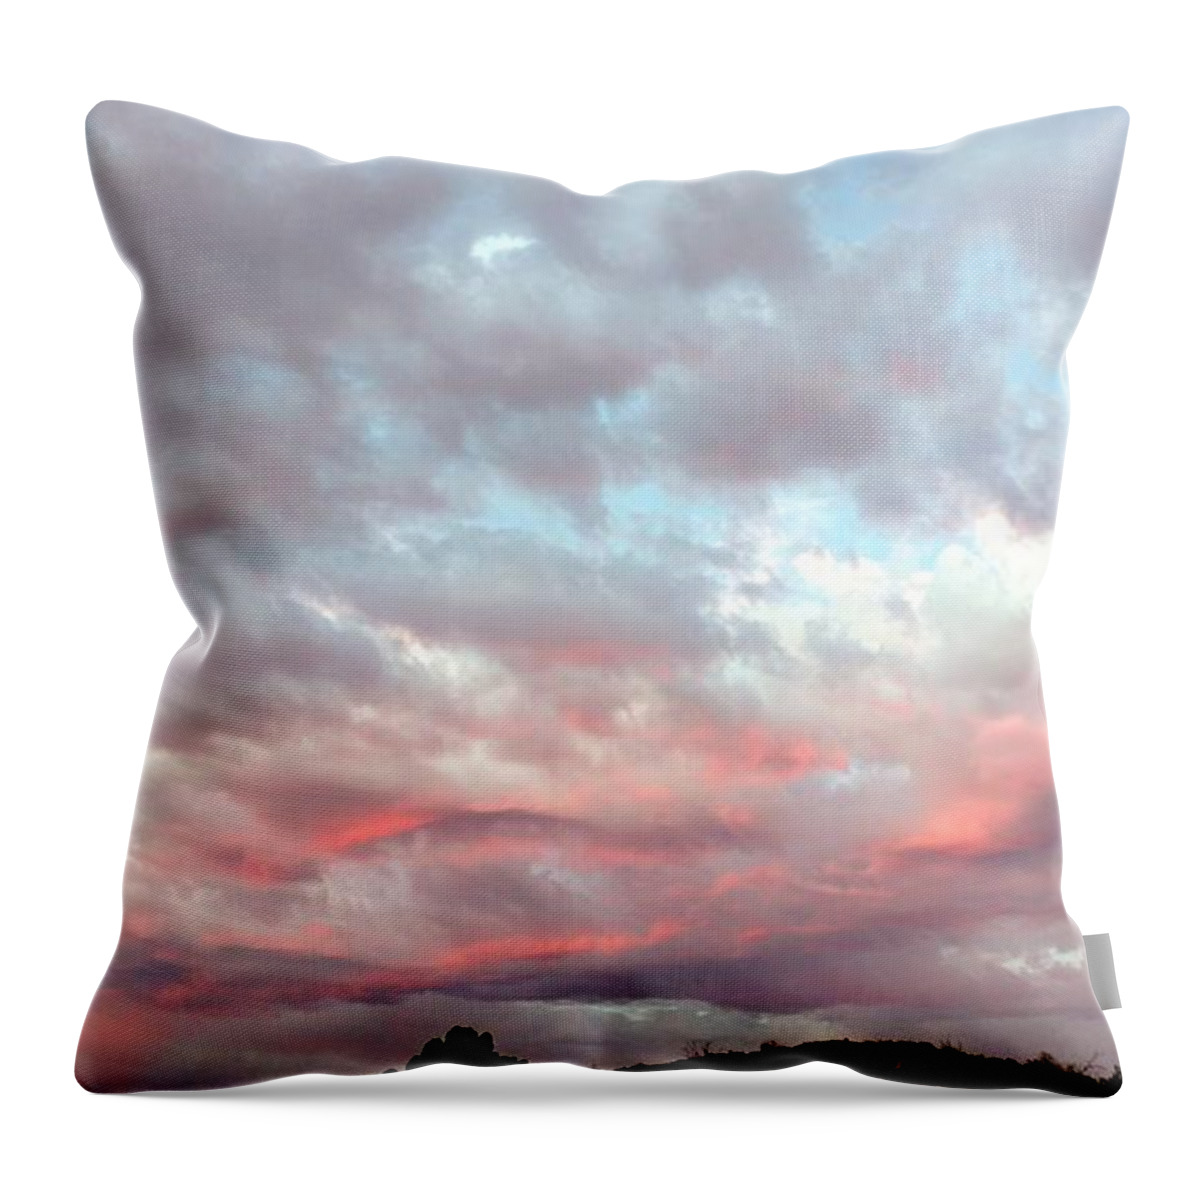 Cloud Throw Pillow featuring the photograph Soft Clouds by J R Yates